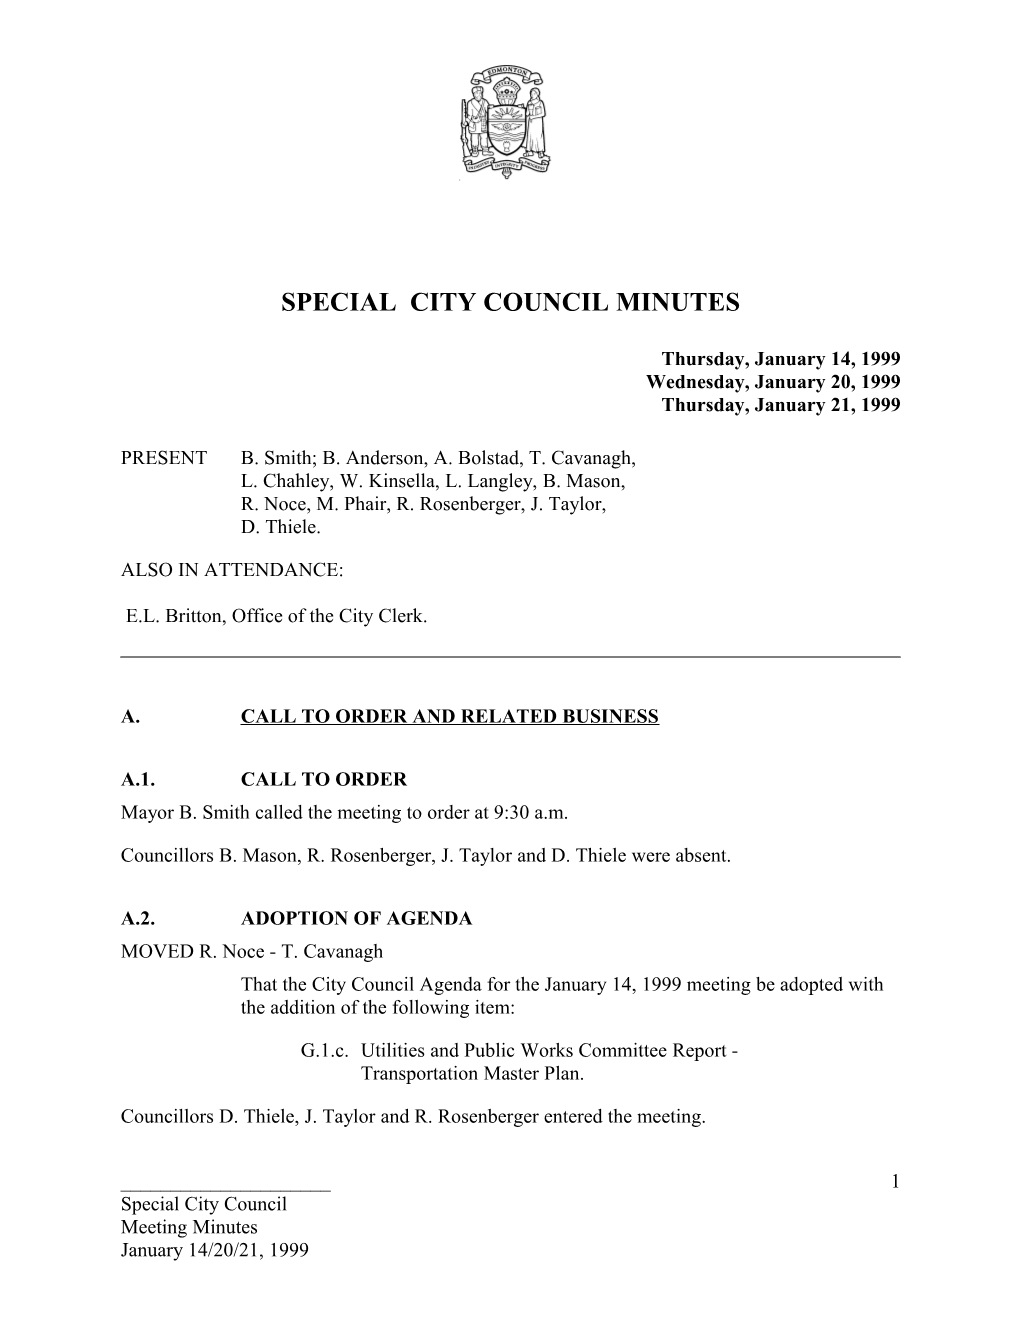 Minutes for City Council January 14, 1999 Meeting